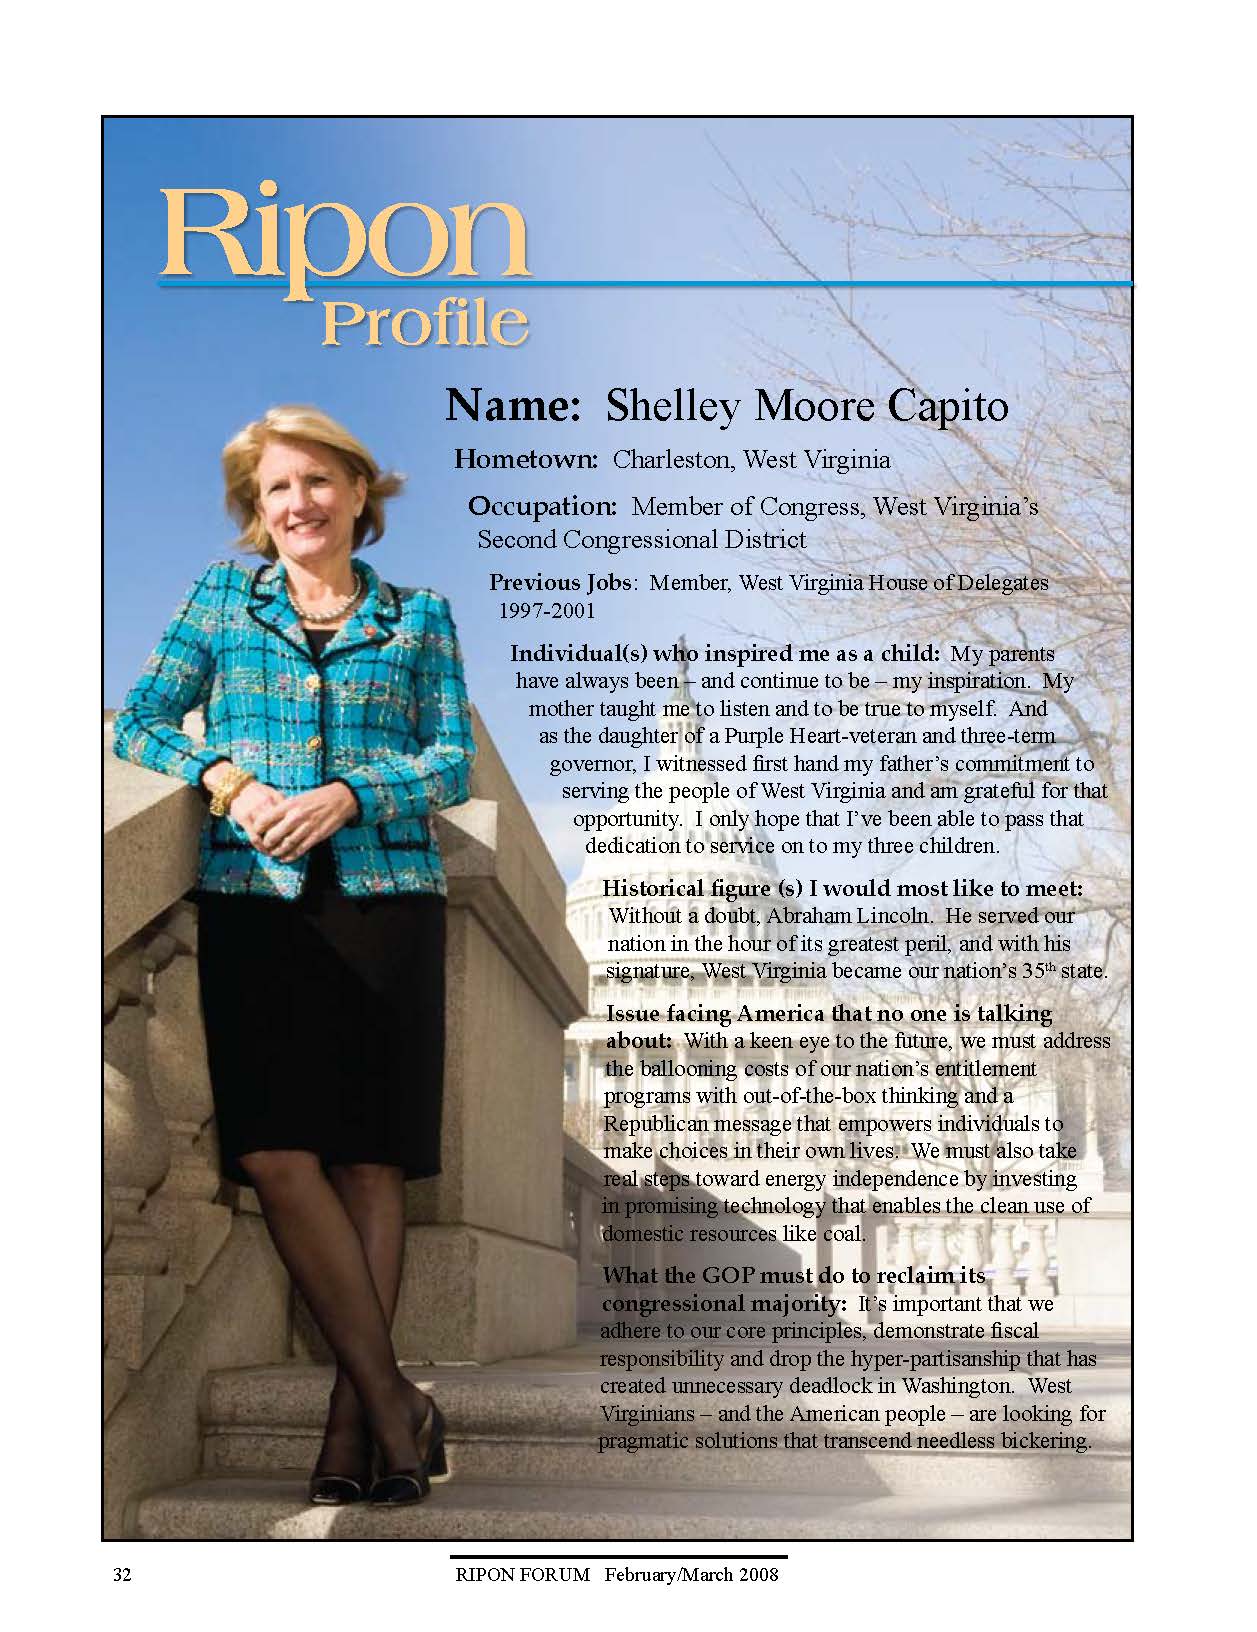 The Ripon Profile of Shelly Moore Capito